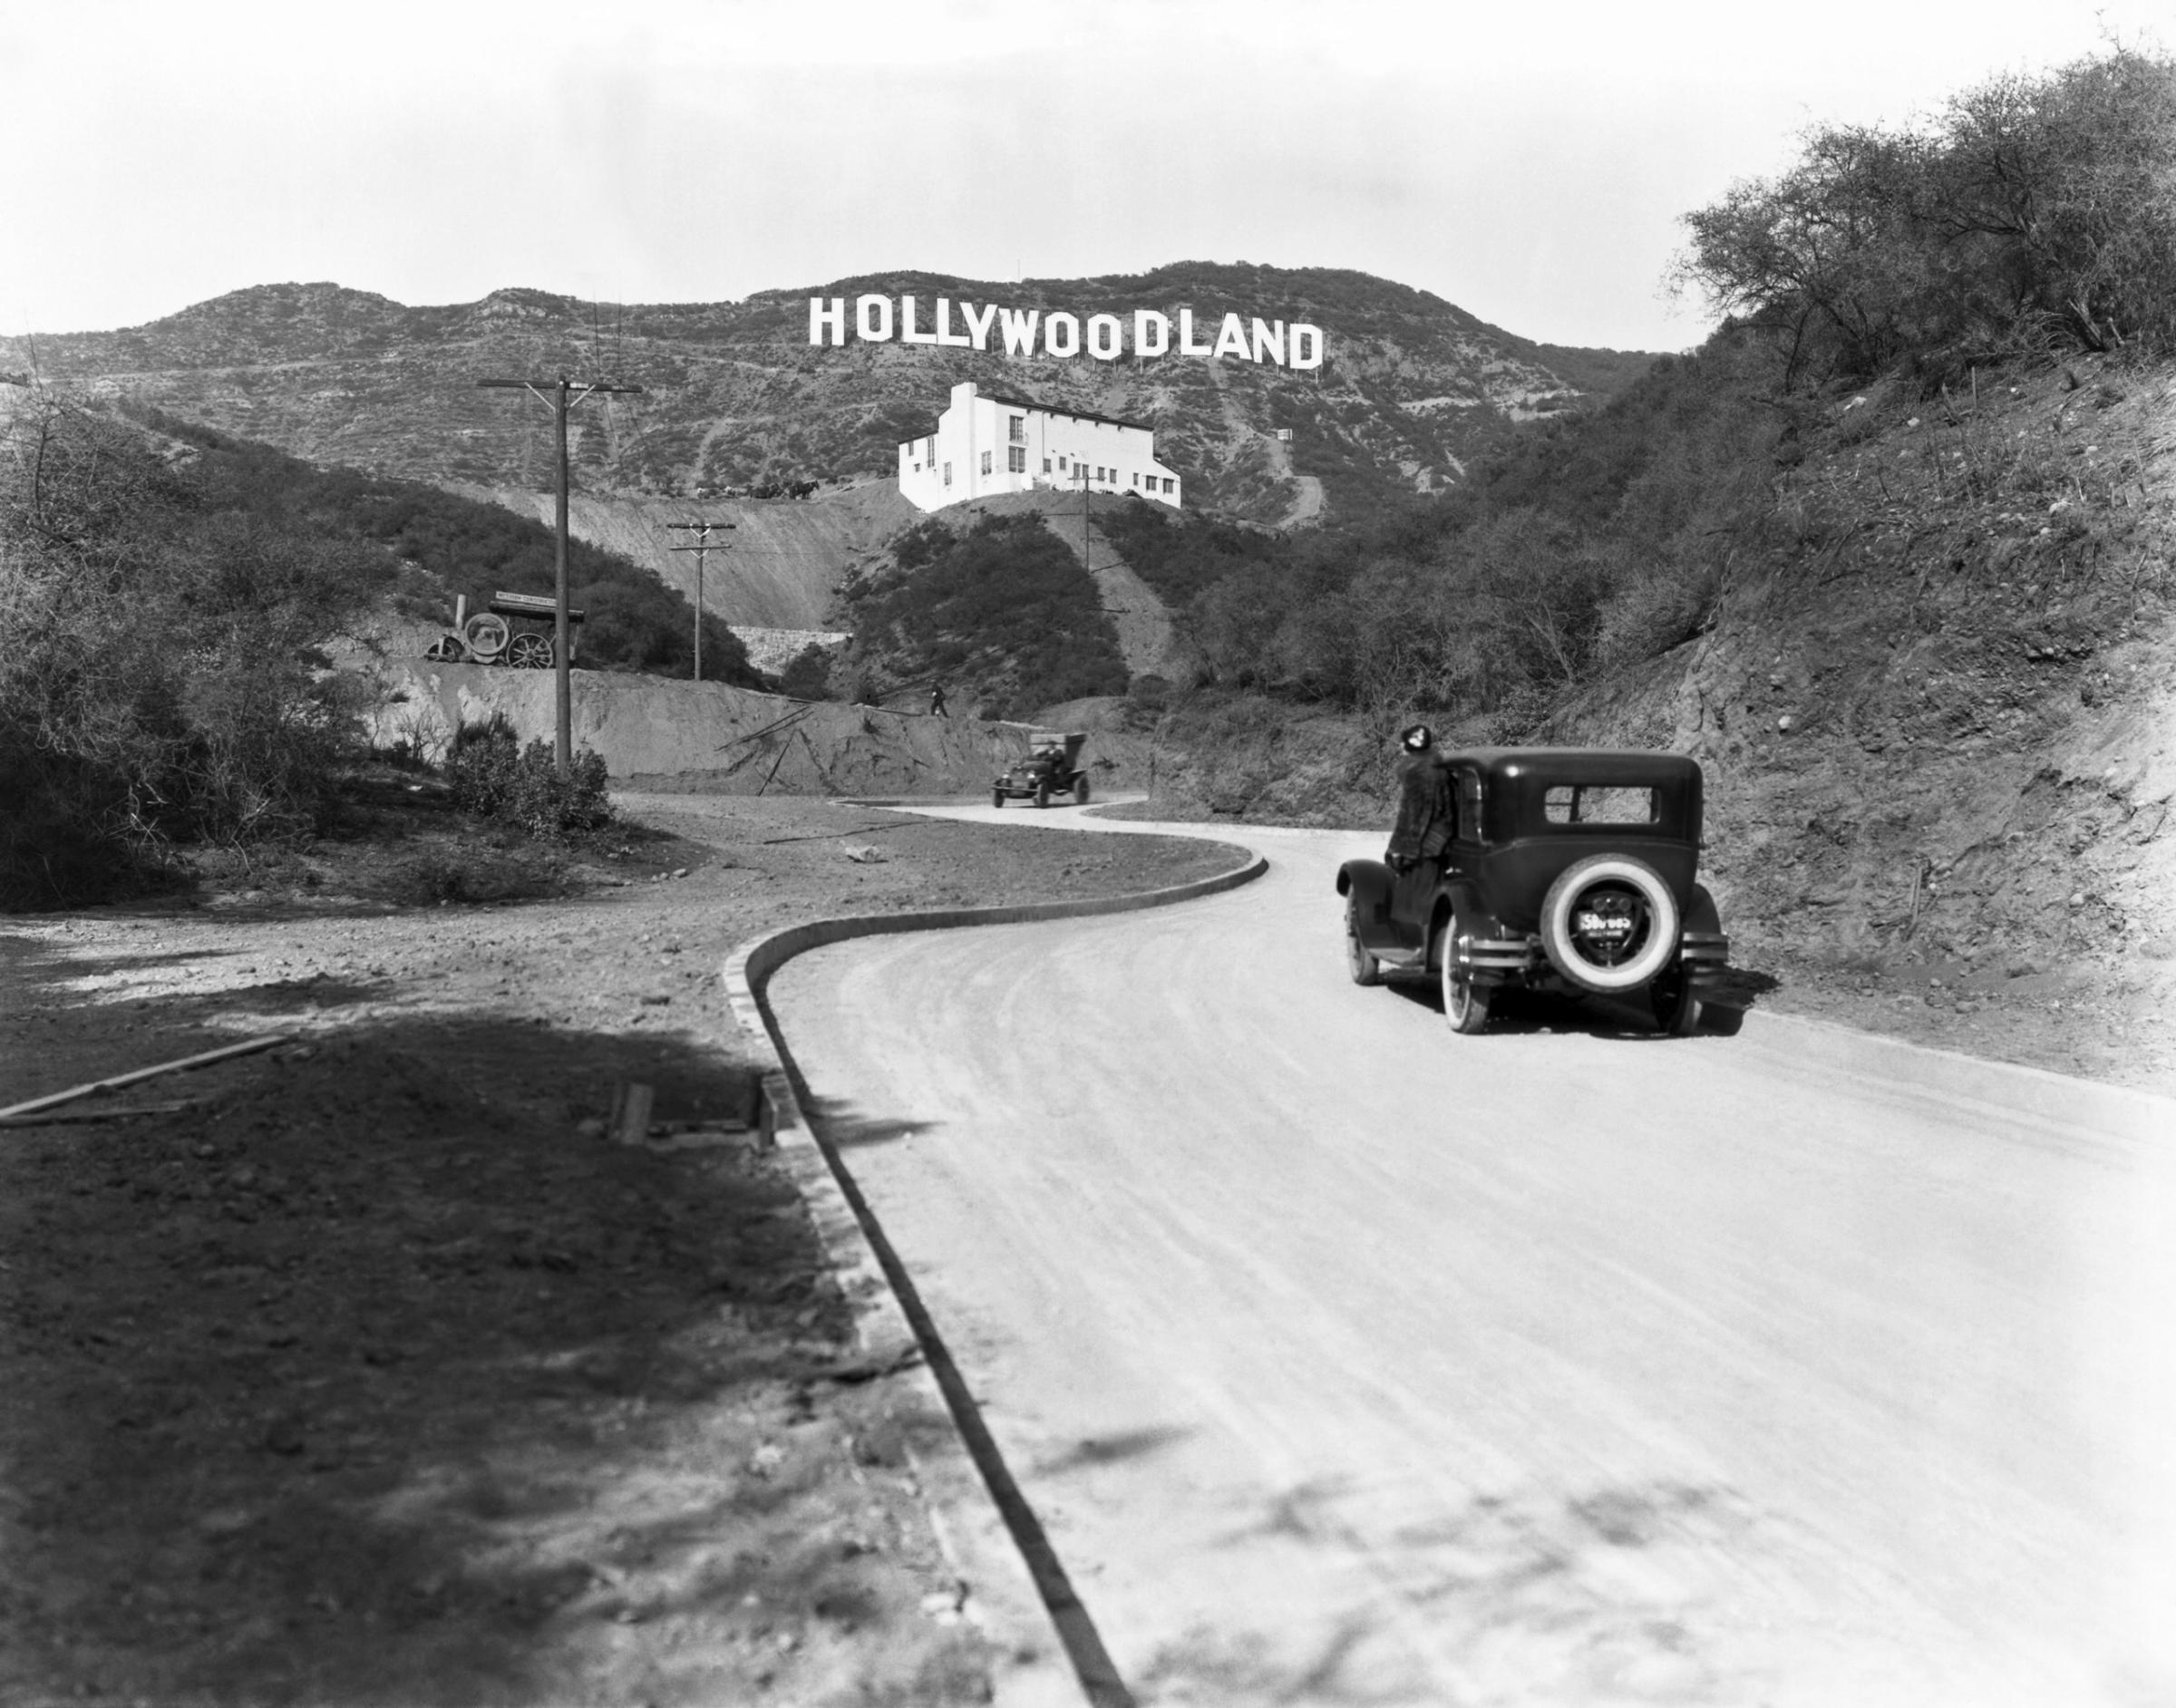 A sign advertises the opening of the Hollywoodland housing development in the hills on Mulholland Drive overlooking Los Angeles, Hollywood, circa 1924.